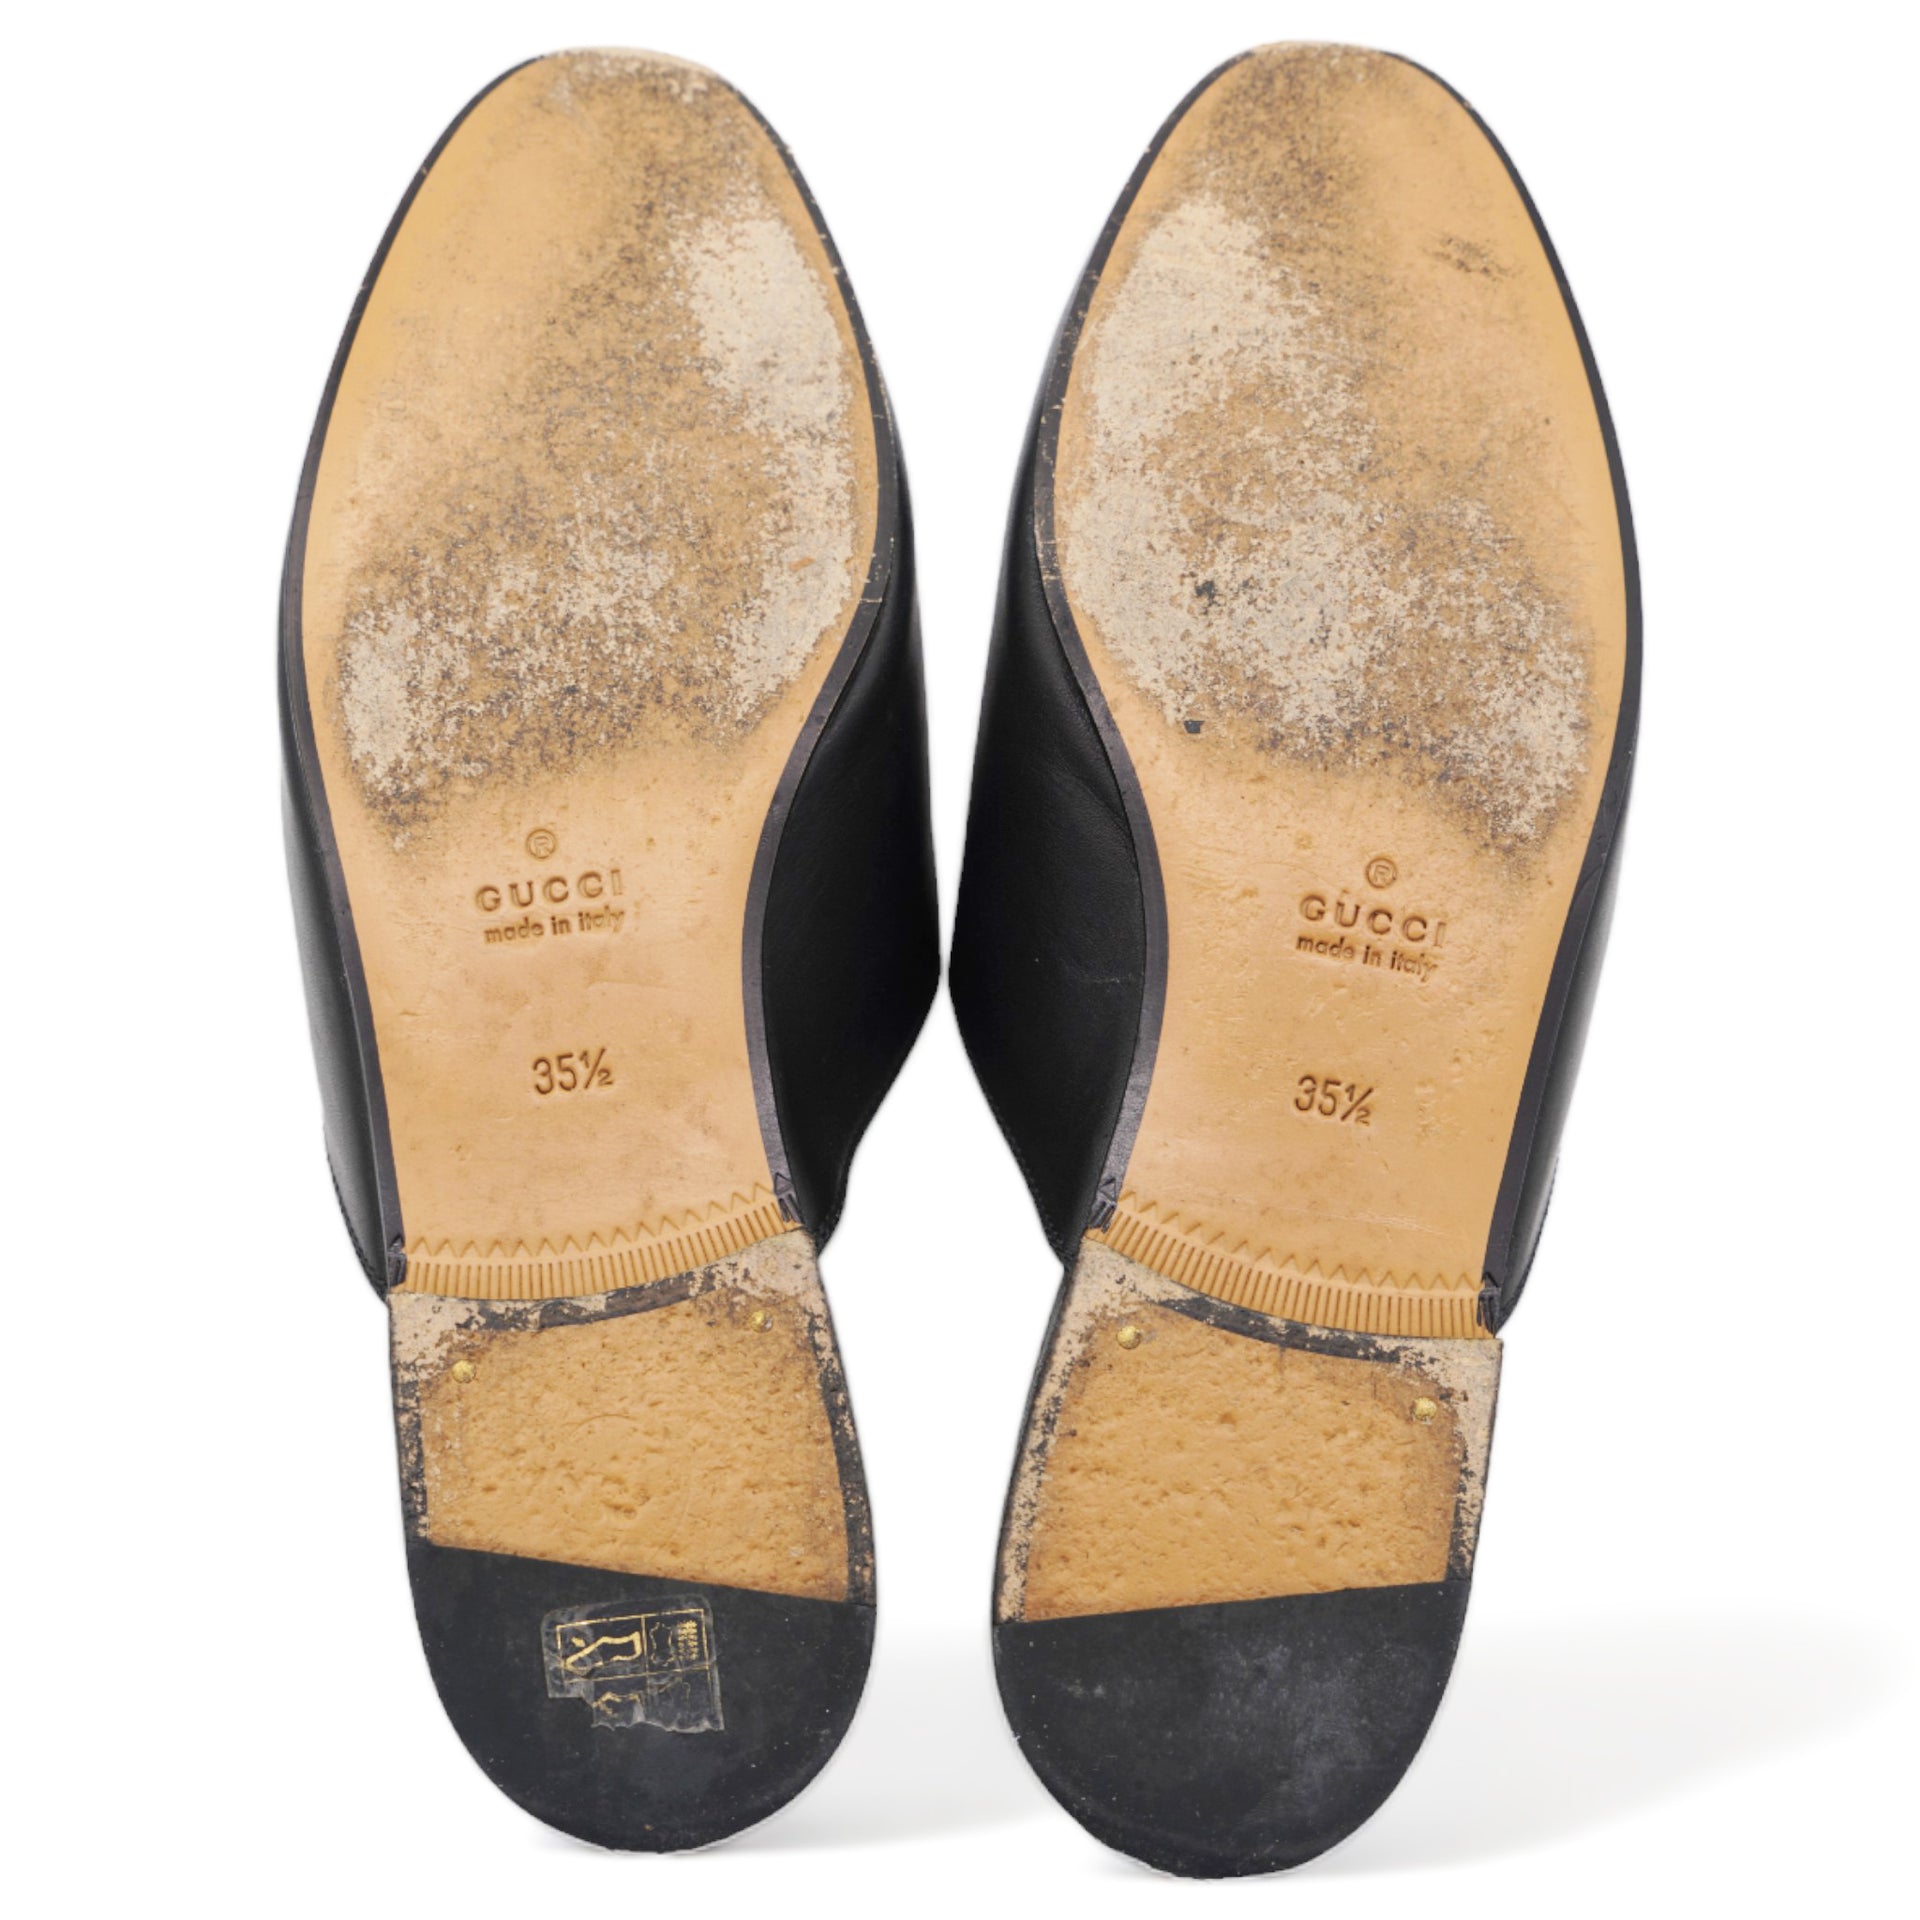 Princetown appliquéd leather slippers 35.5